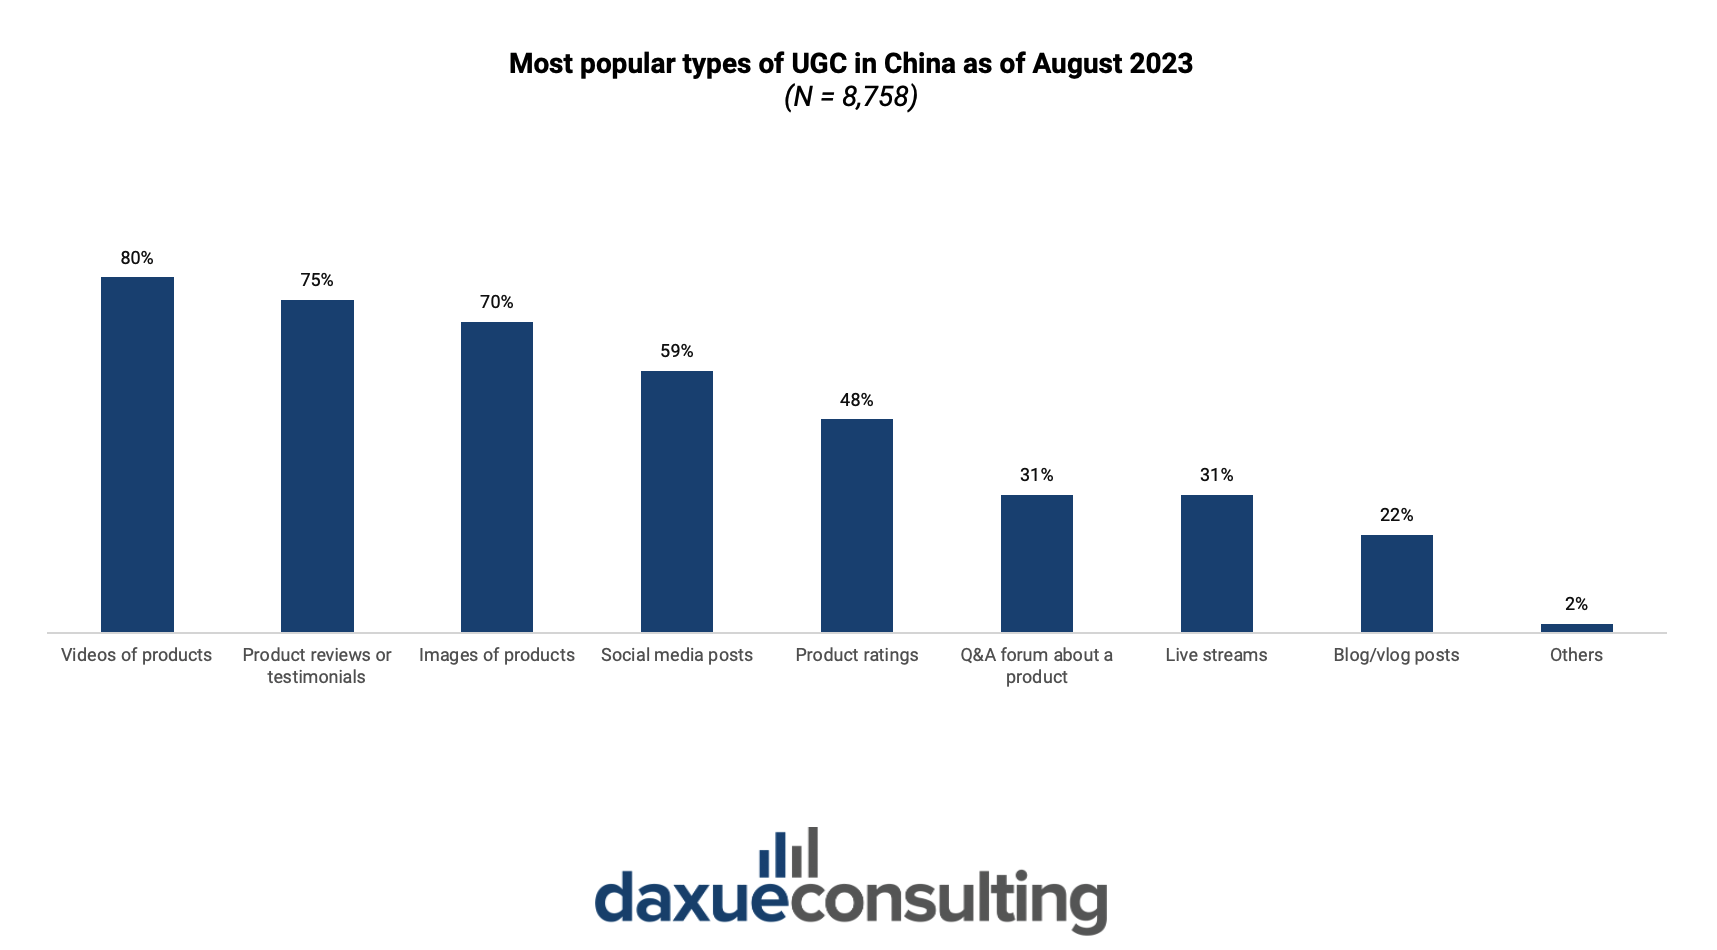 Daxue: Most popular types of UGC in China 2023